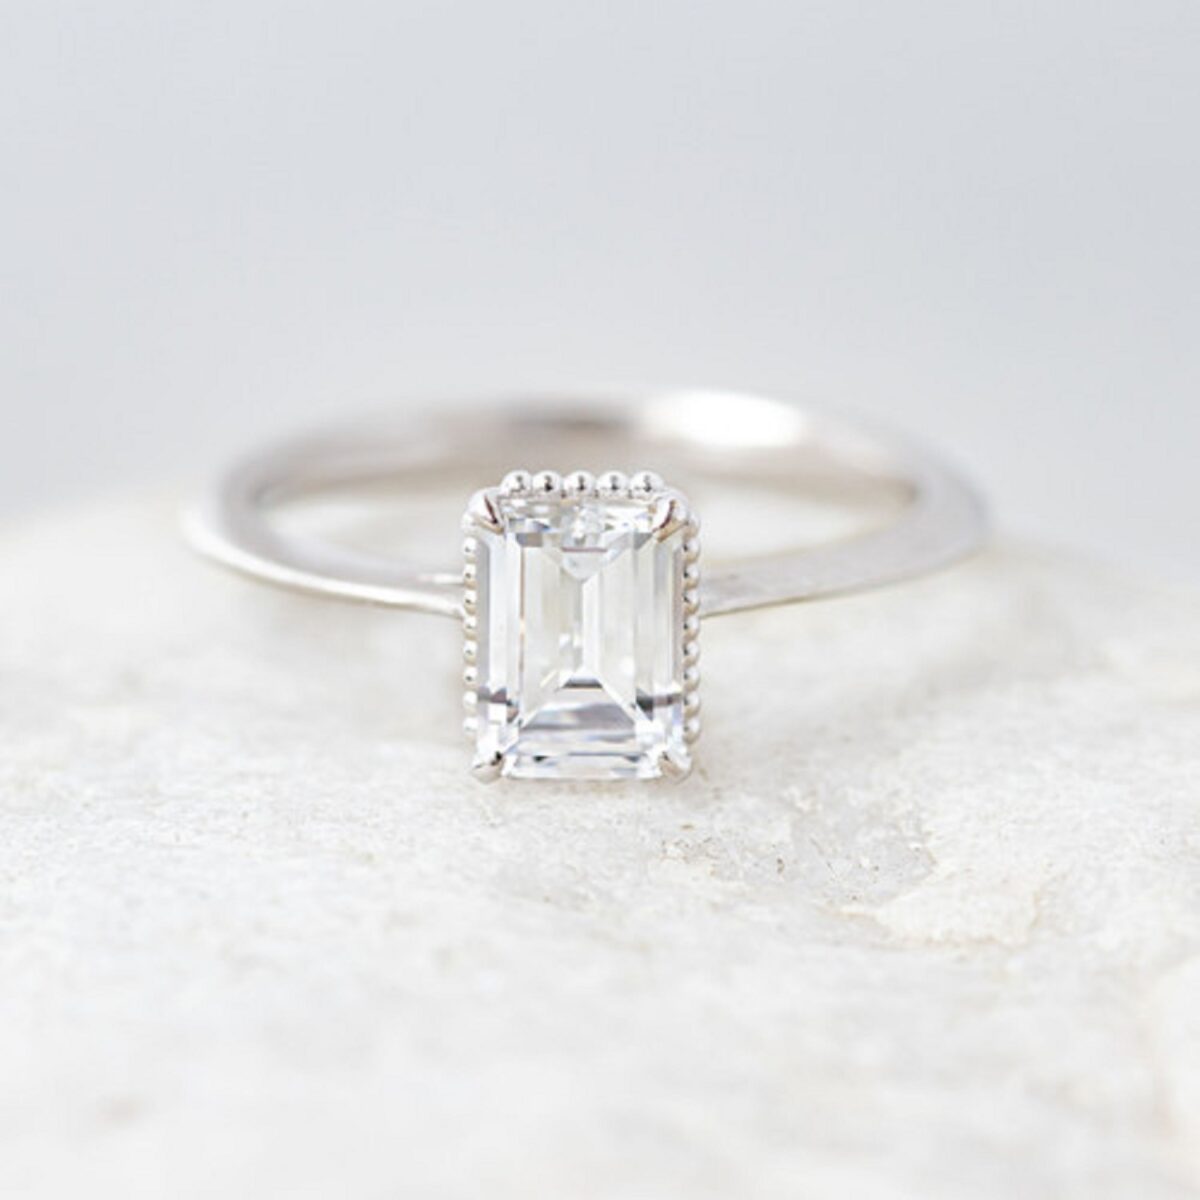 Unique hidden bead halo emerald cut solitaire ring crafted in 14k white gold.